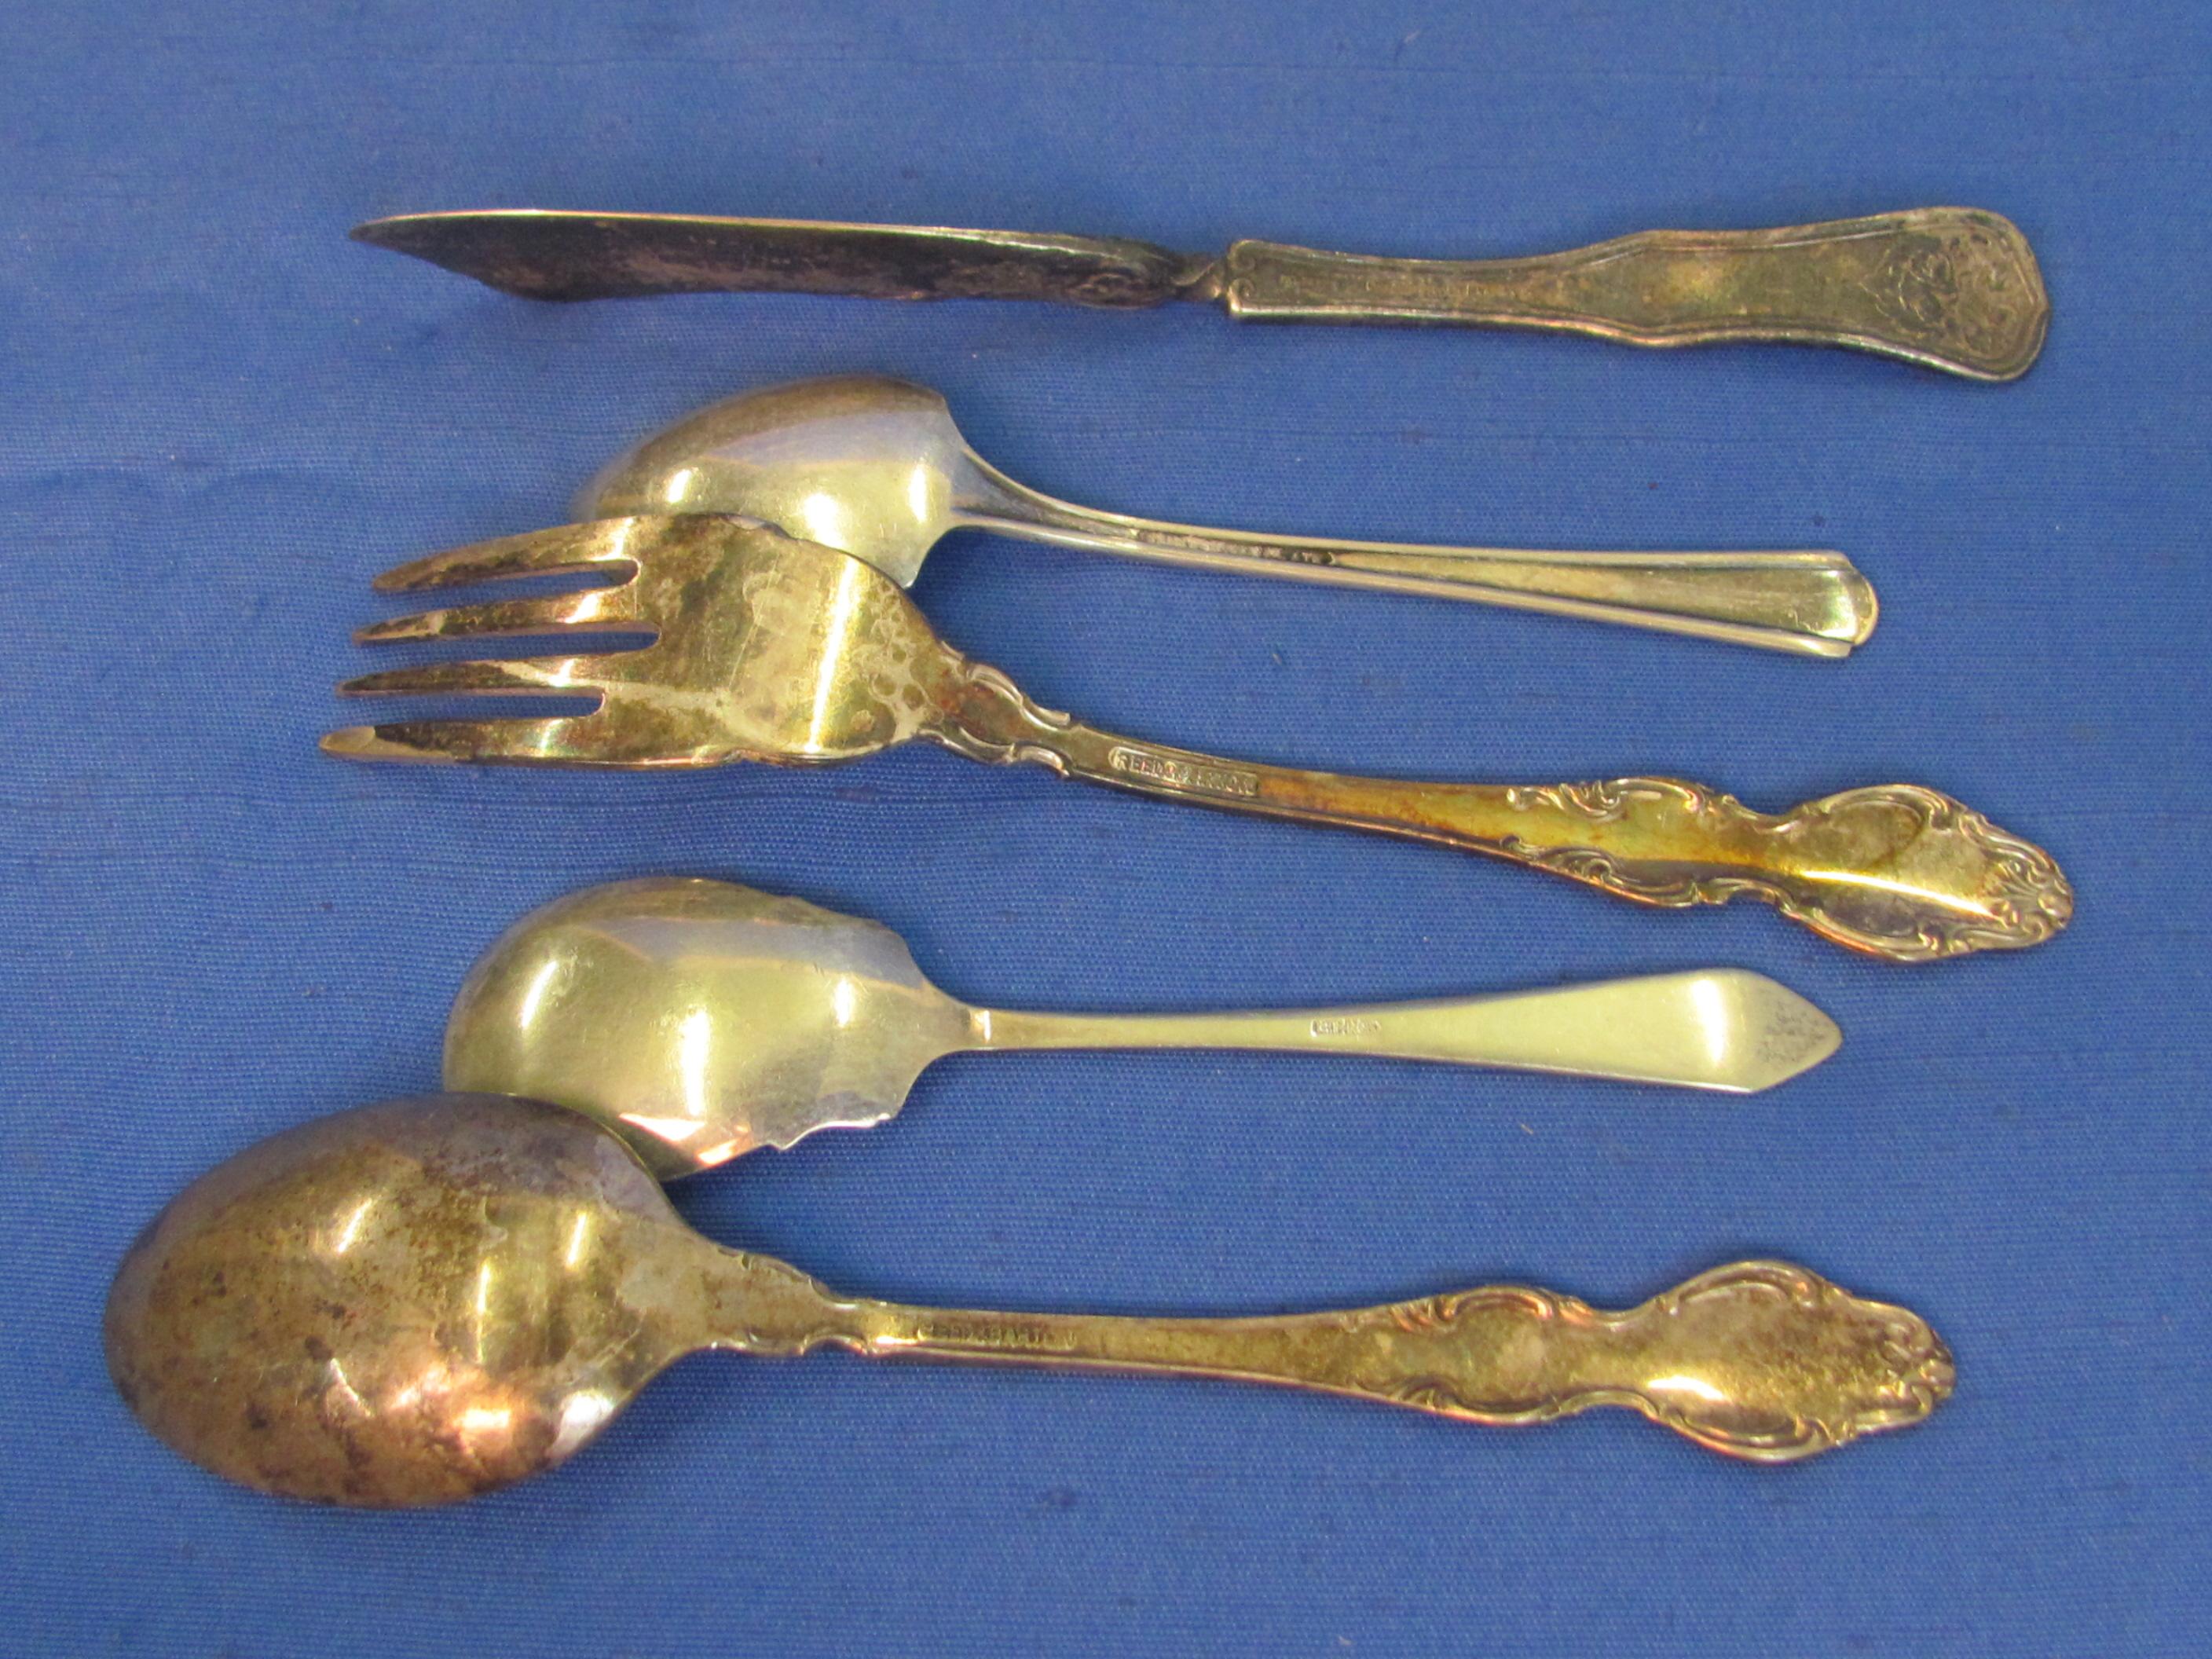 Mixed Lot of Vintage Silverplate Flatware: Spoons, Forks, Relish Forks